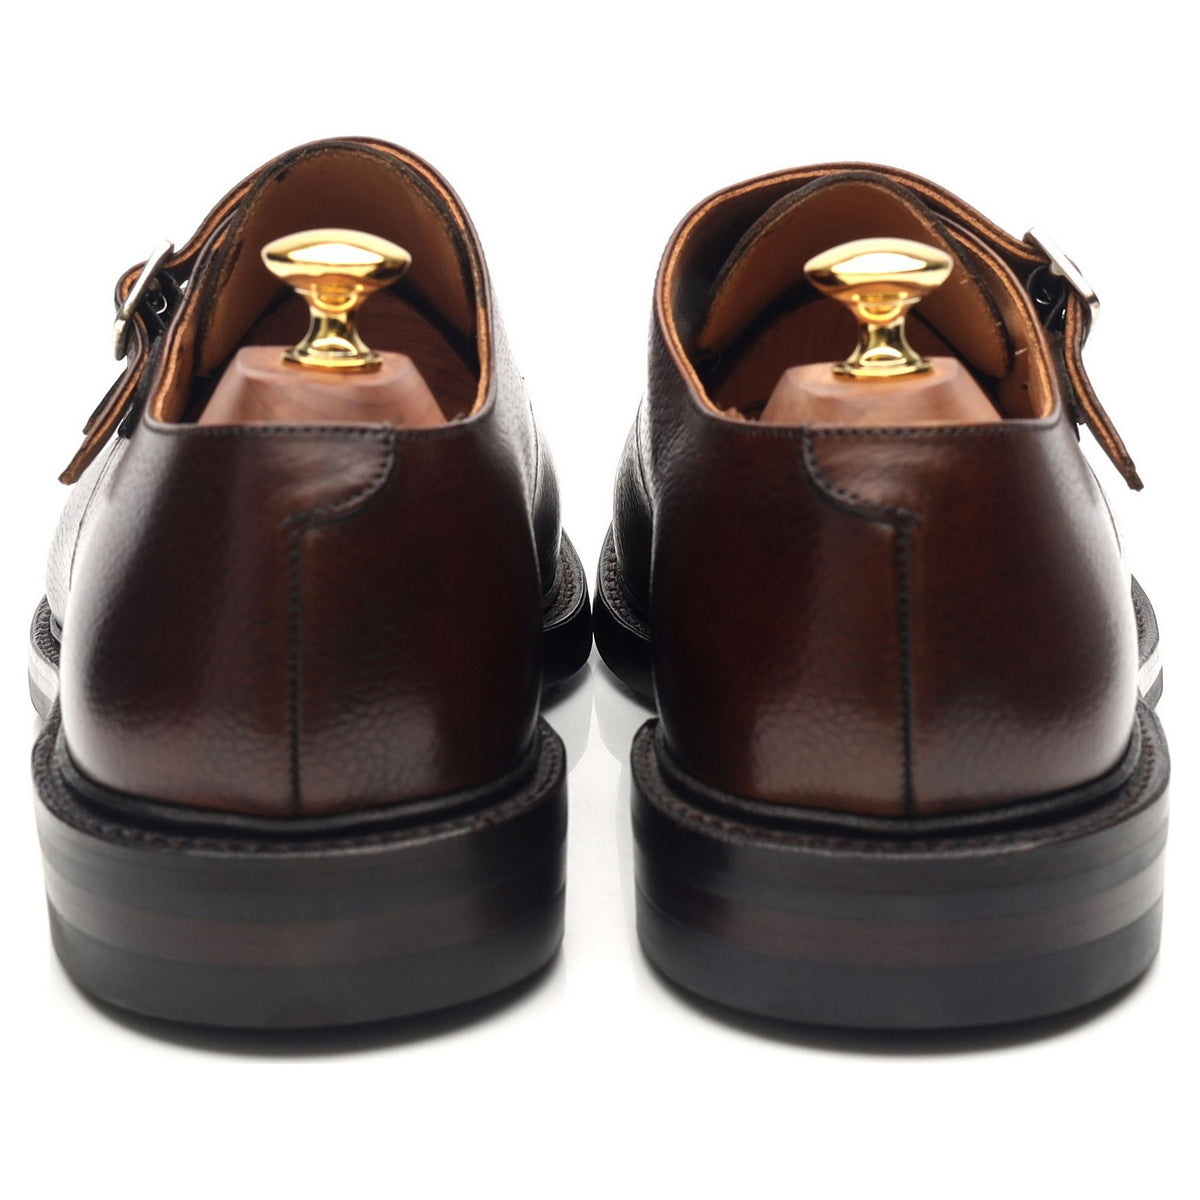 New &amp; Lingwood Dark Brown Leather Double Monk Straps UK 9.5 E